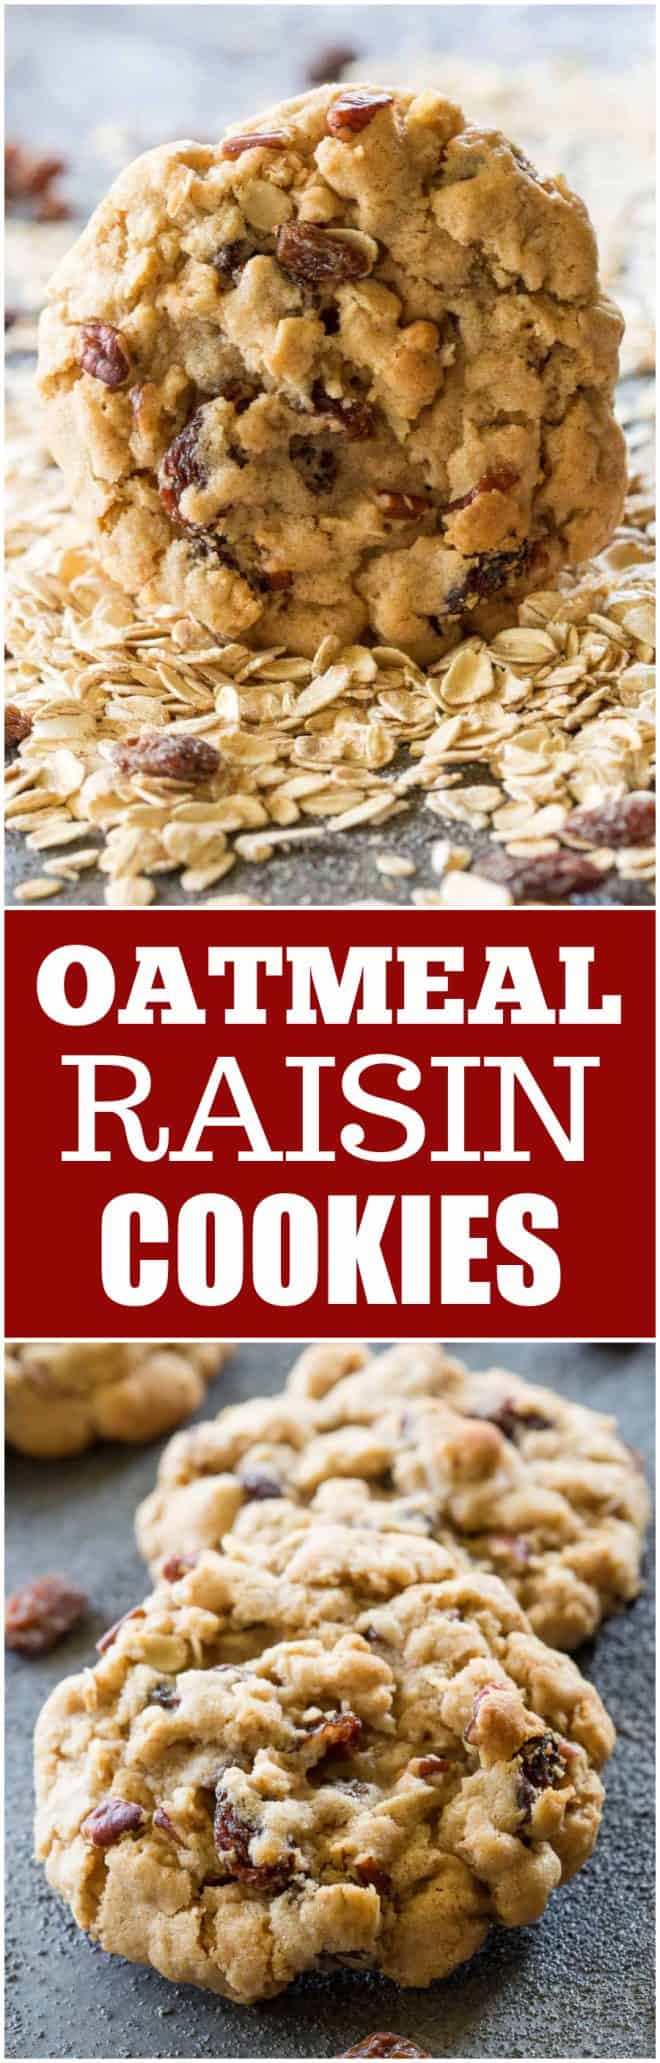 The Best Chewy Oatmeal Raisin Cookies - perfect texture, full of oats, raisins, and nuts. #chewy #oatmeal #raisin #cookie #recipe #dessert #thick